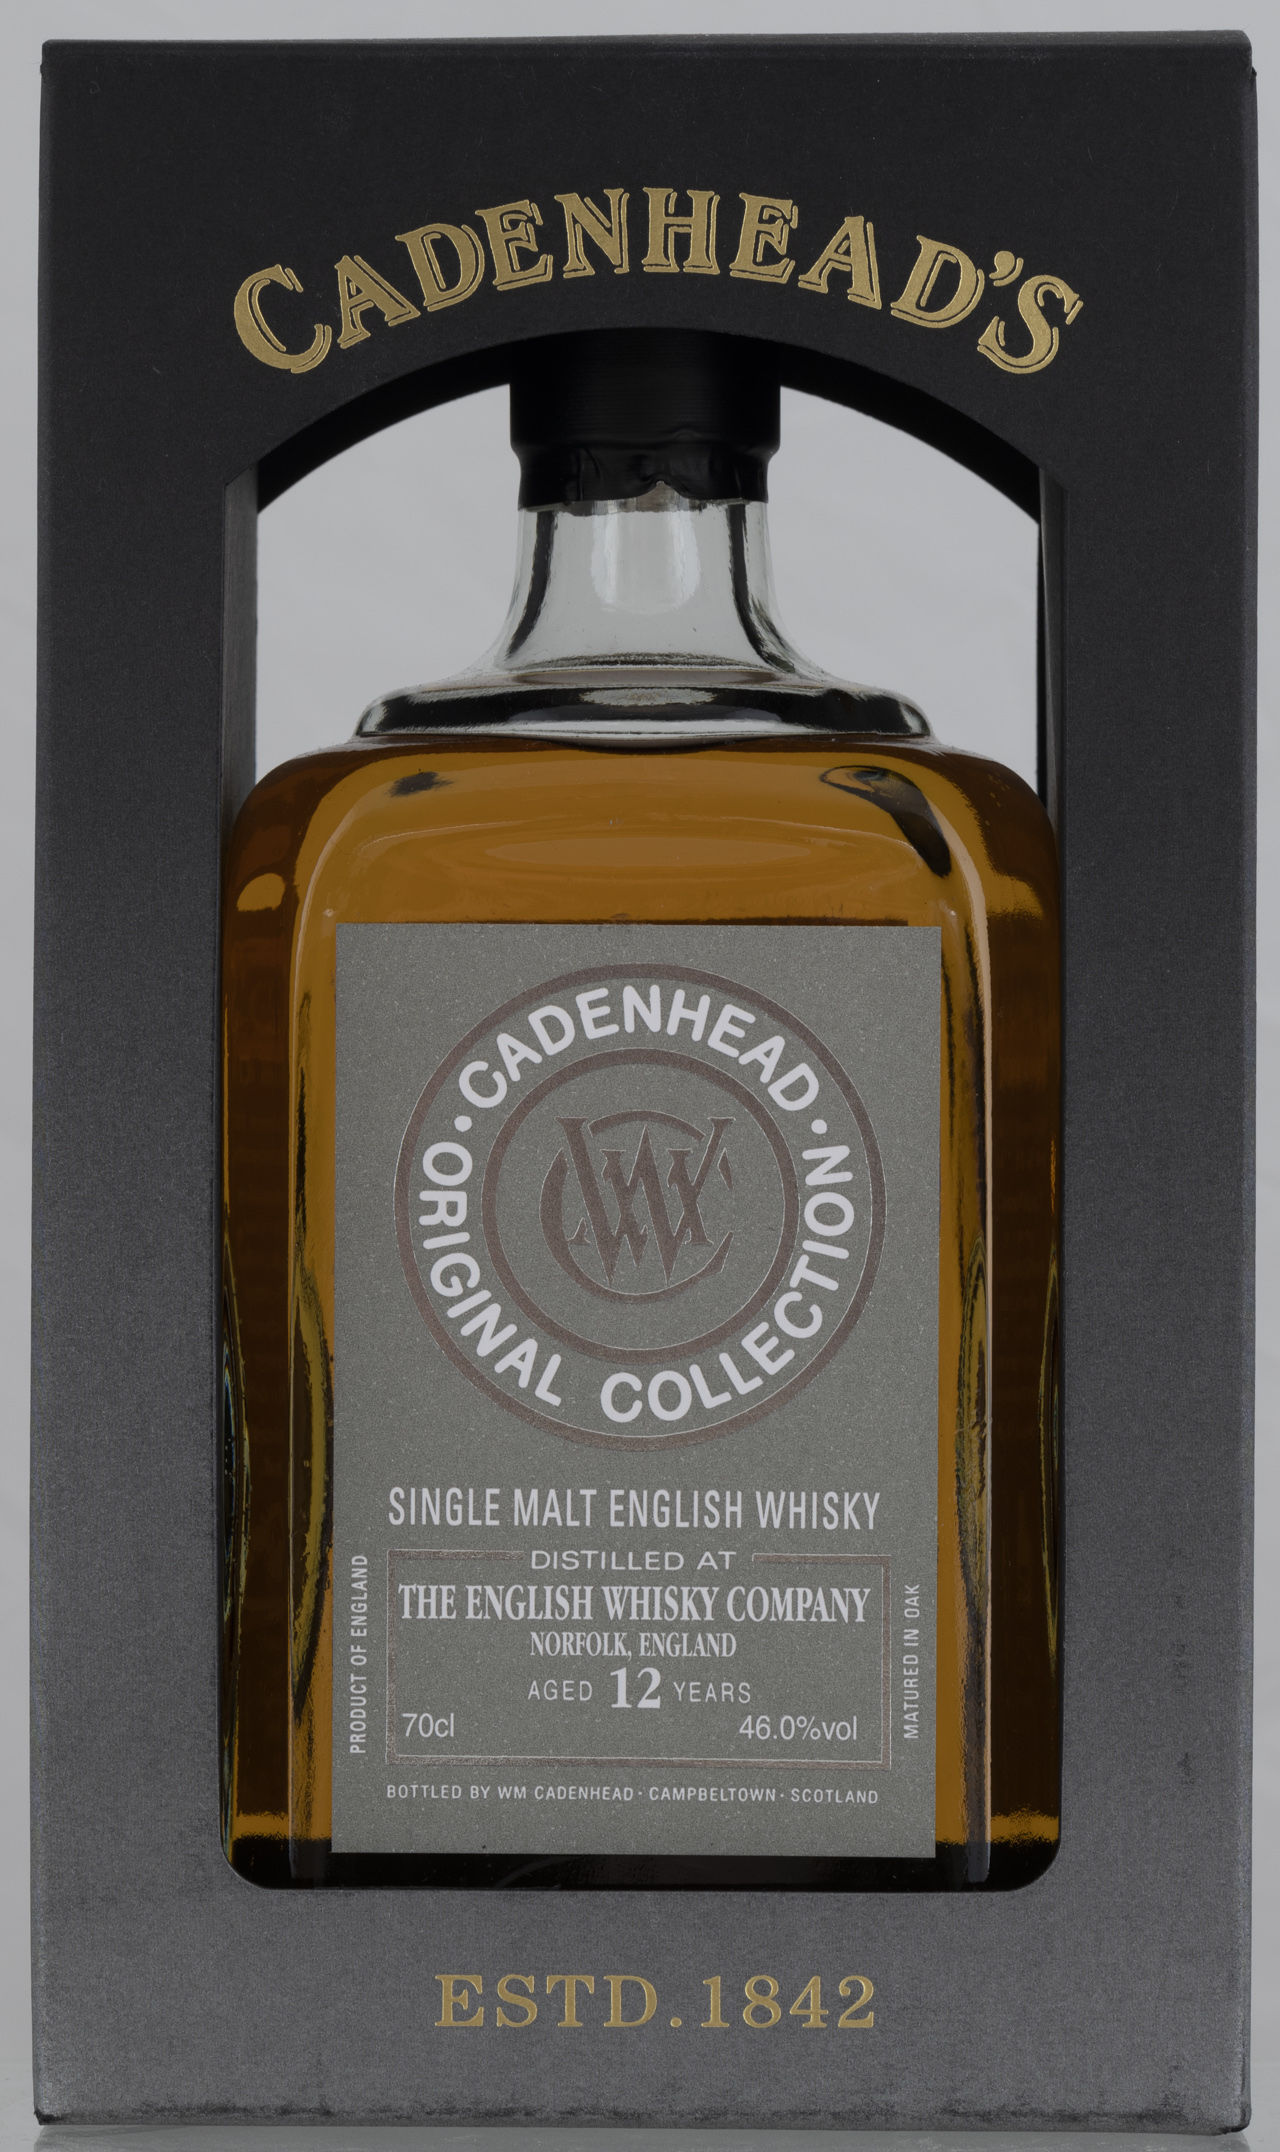 Billede: PHC_7268 - Cadenheads Original Collection The English Whisky Company 12 - box front.jpg